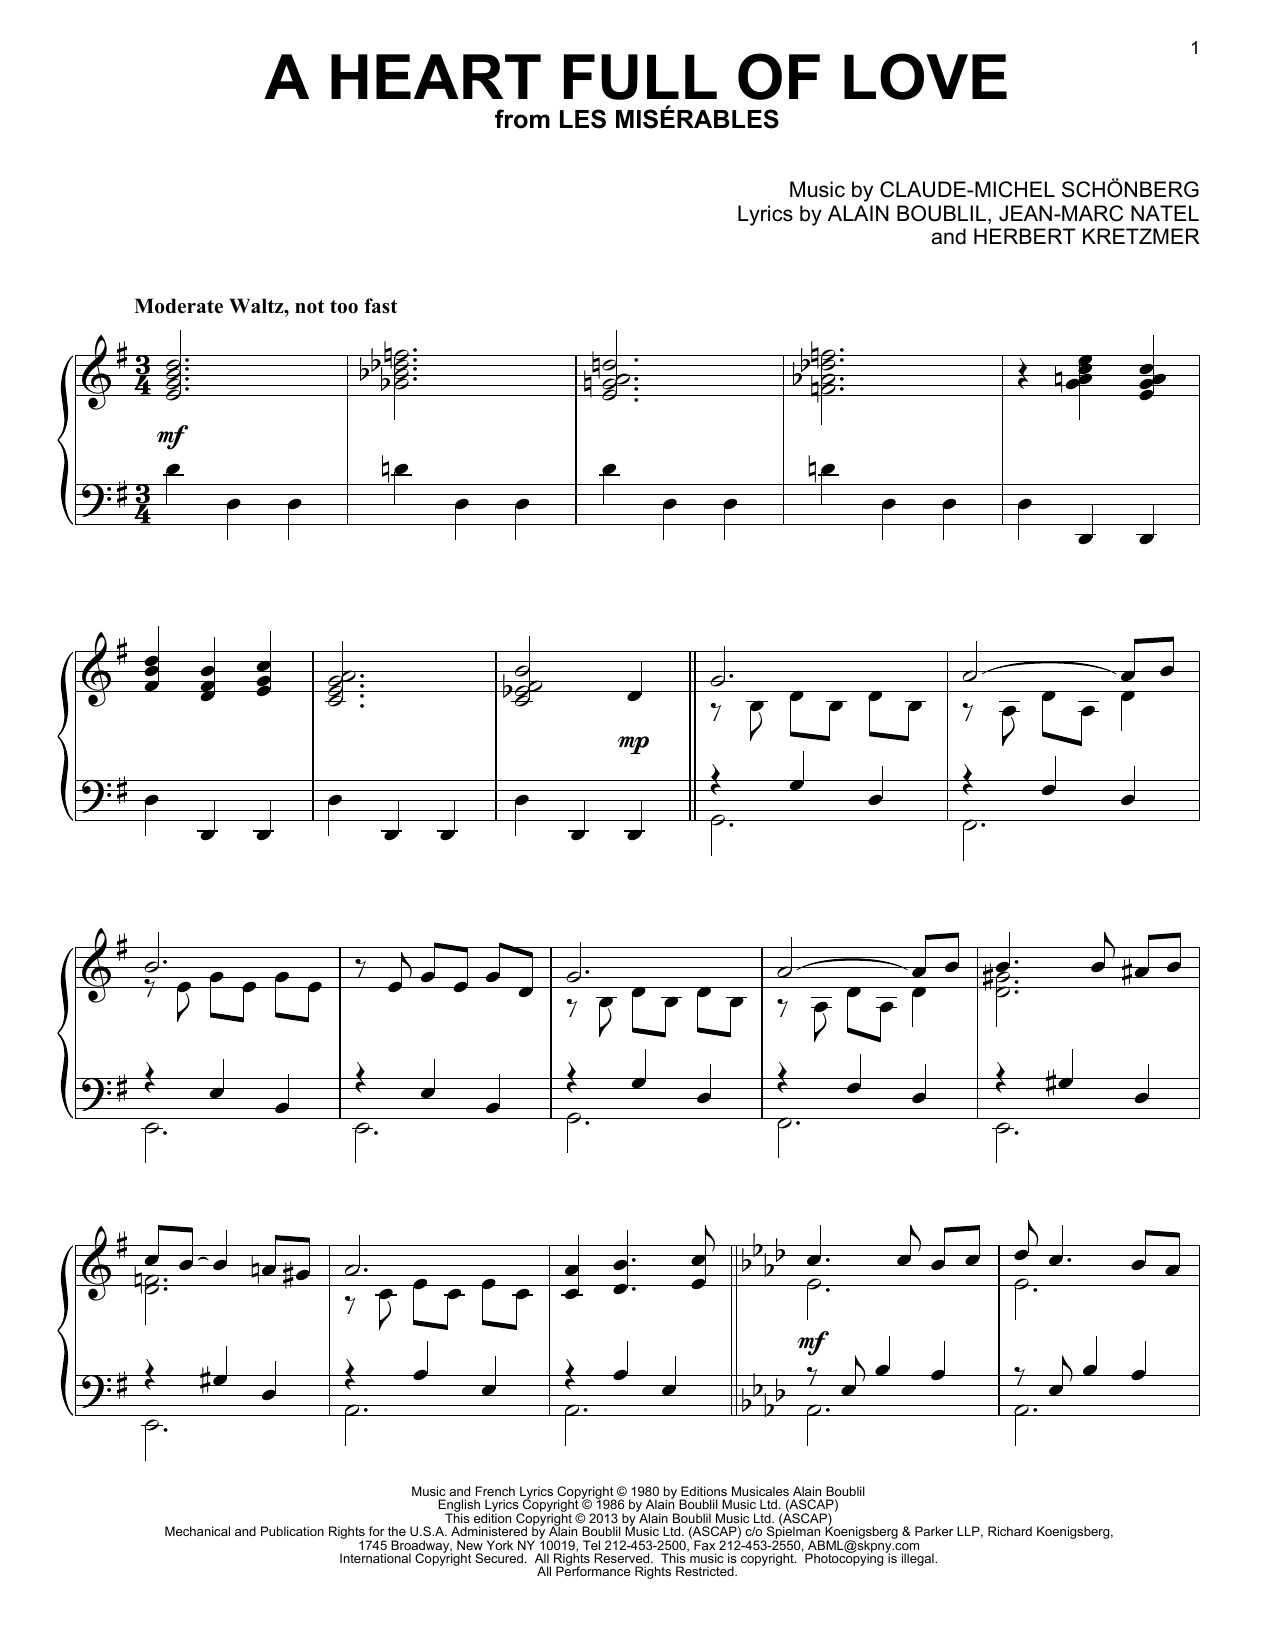 Download Les Miserables (Musical) A Heart Full Of Love Sheet Music